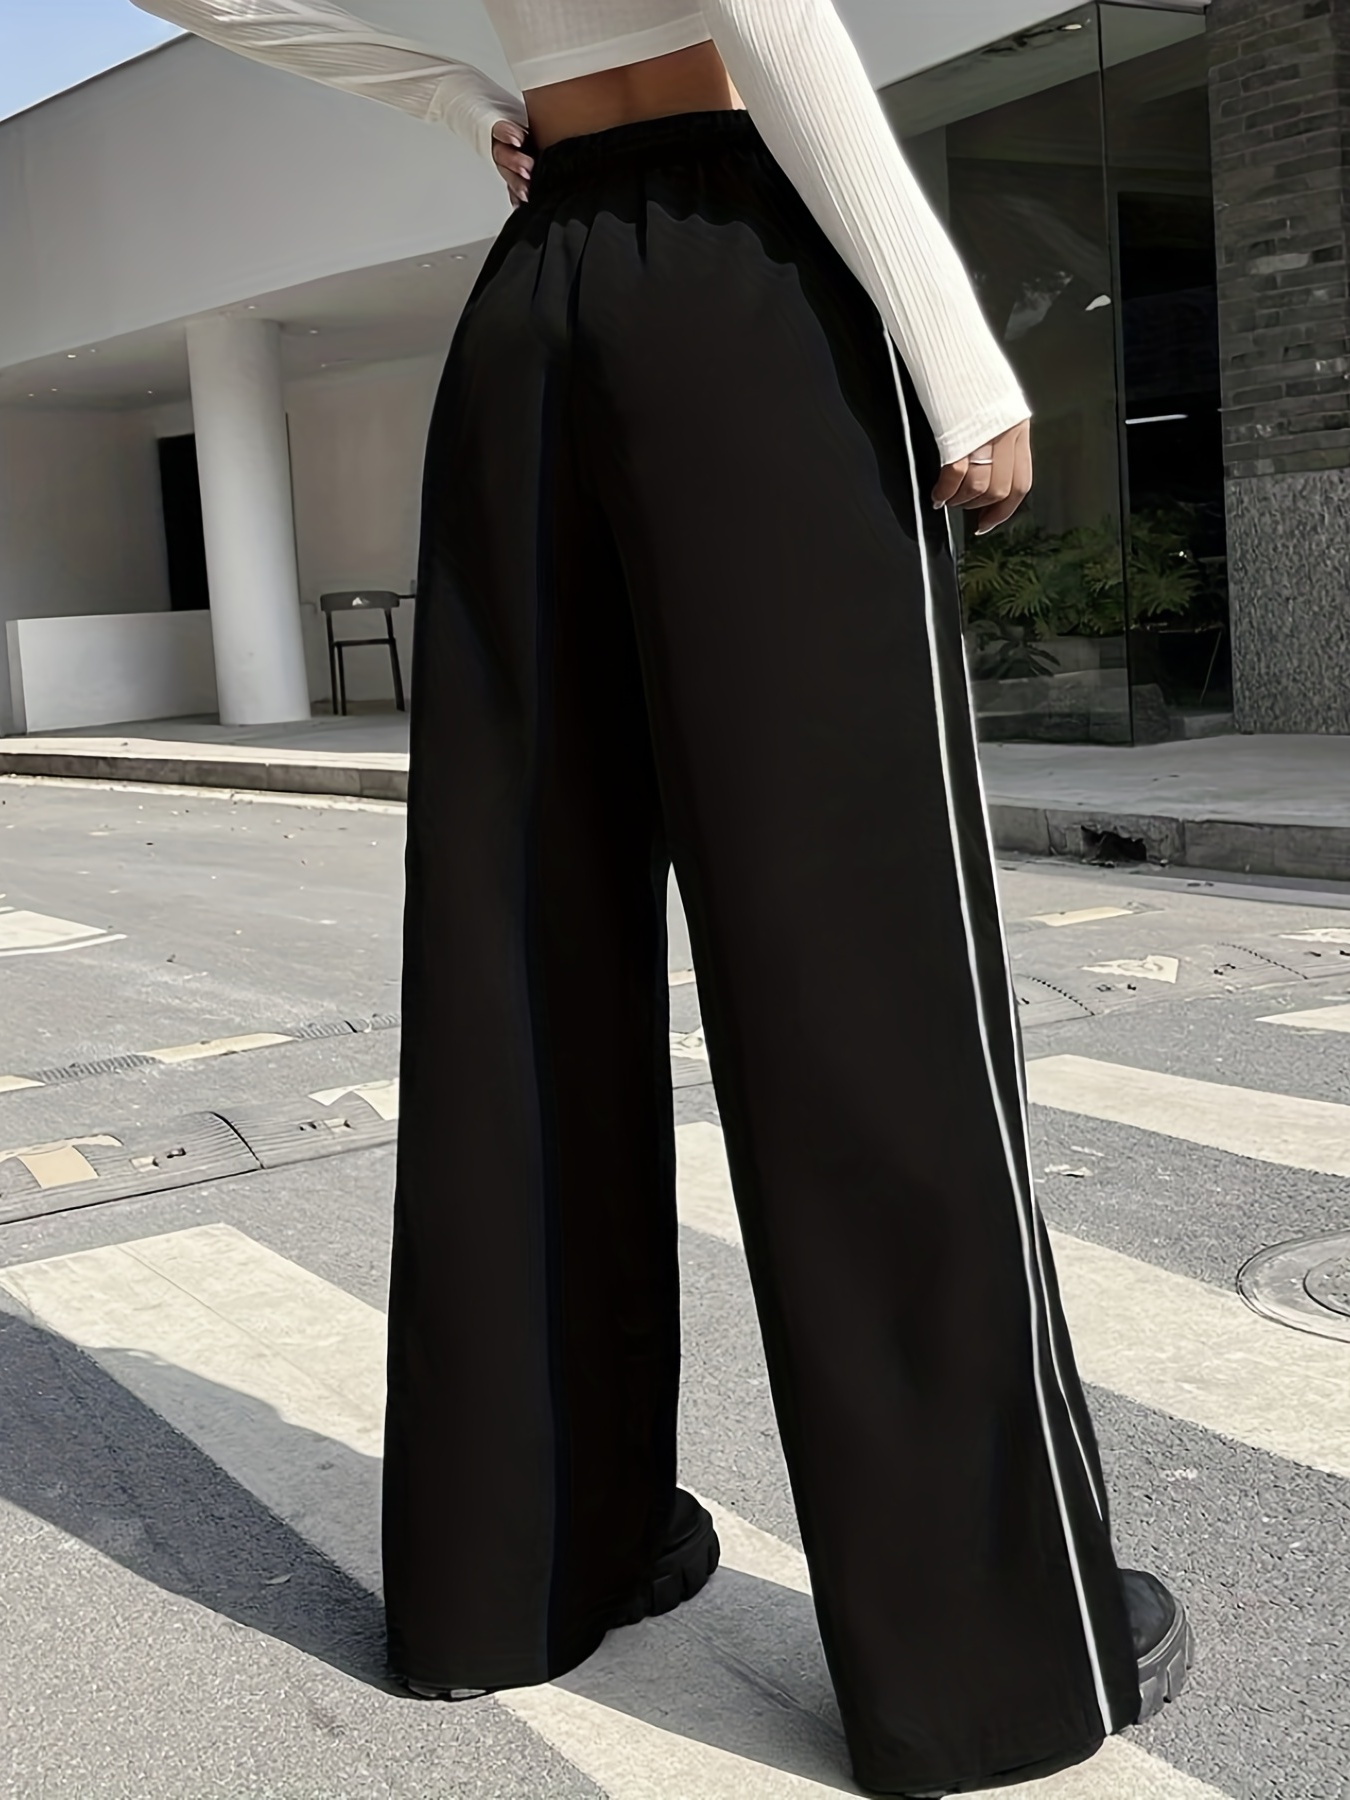 Womens Pants Casual, Womens Casual Workout Wide Leg Pants with